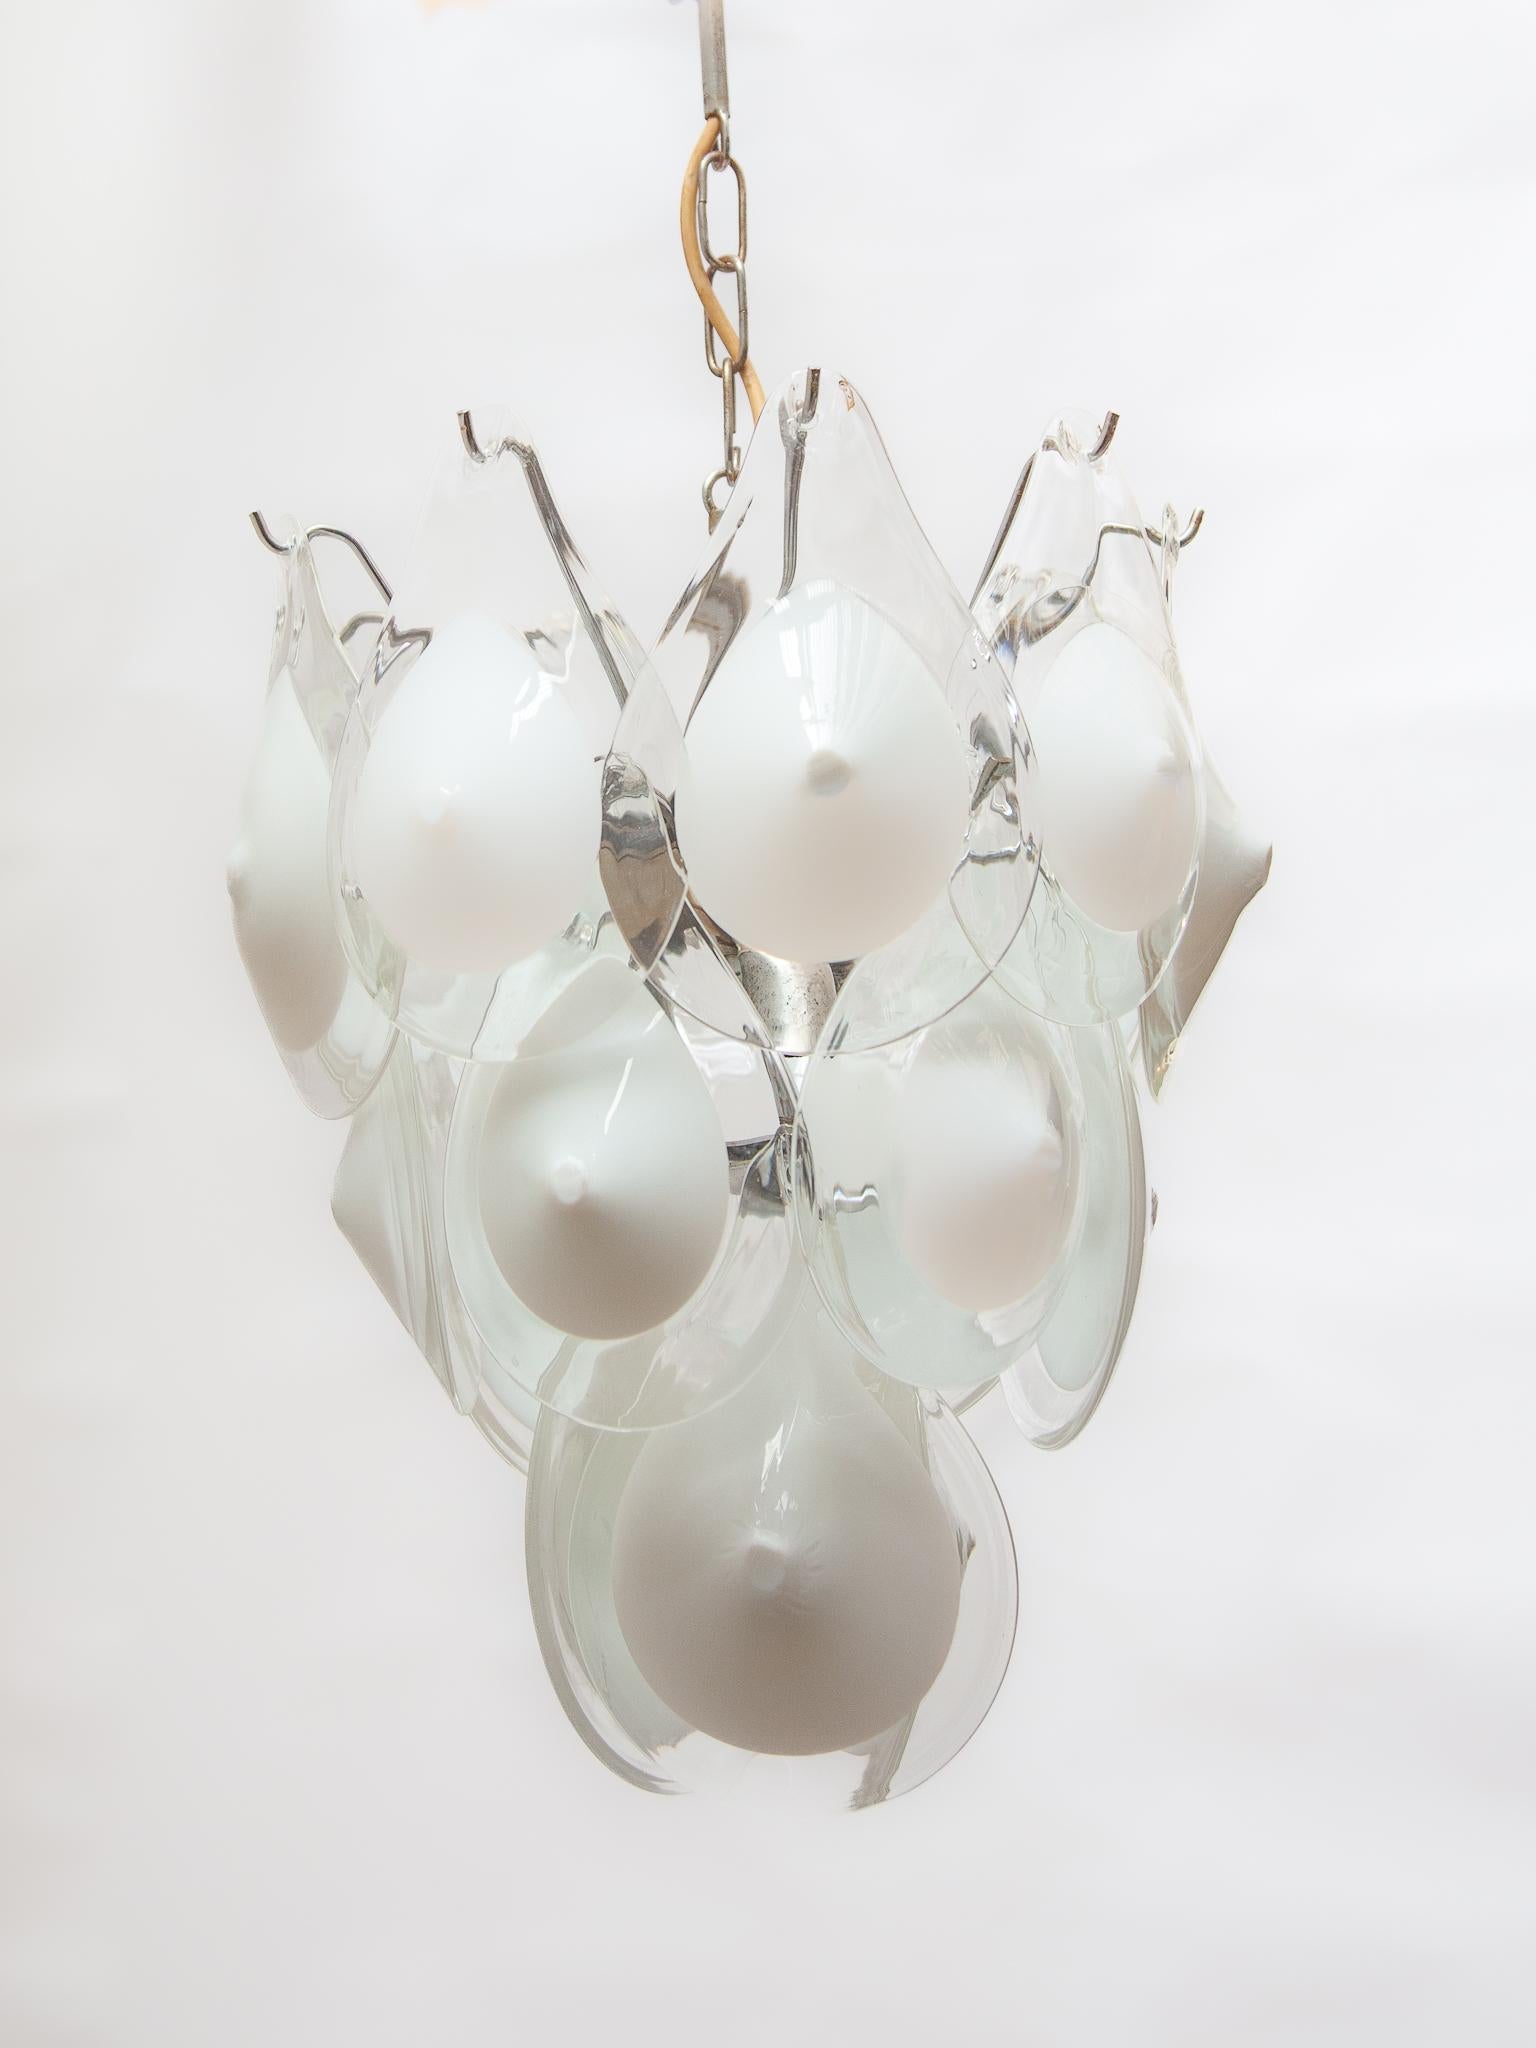 Hand-Crafted 1960s Vistosi Opal Glass Chandelier Rare Murano Lighting, italy  For Sale